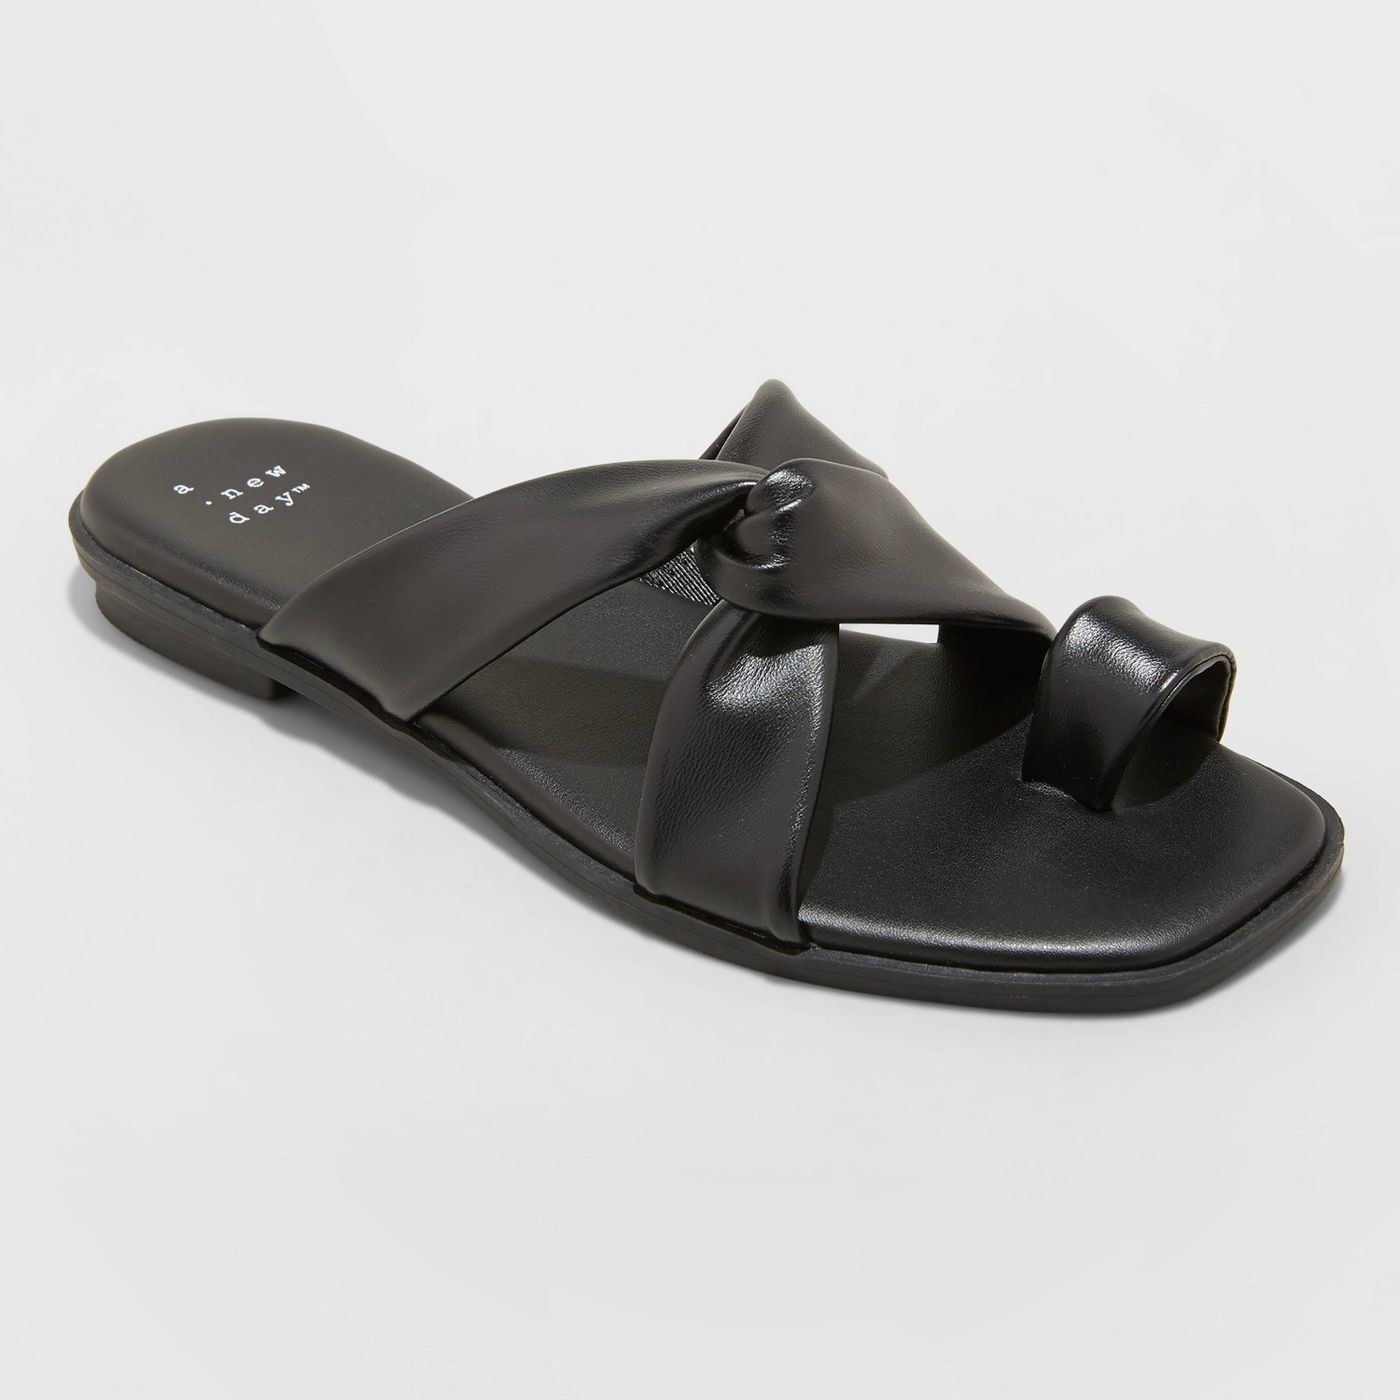 Black leather sandals with black leather sole